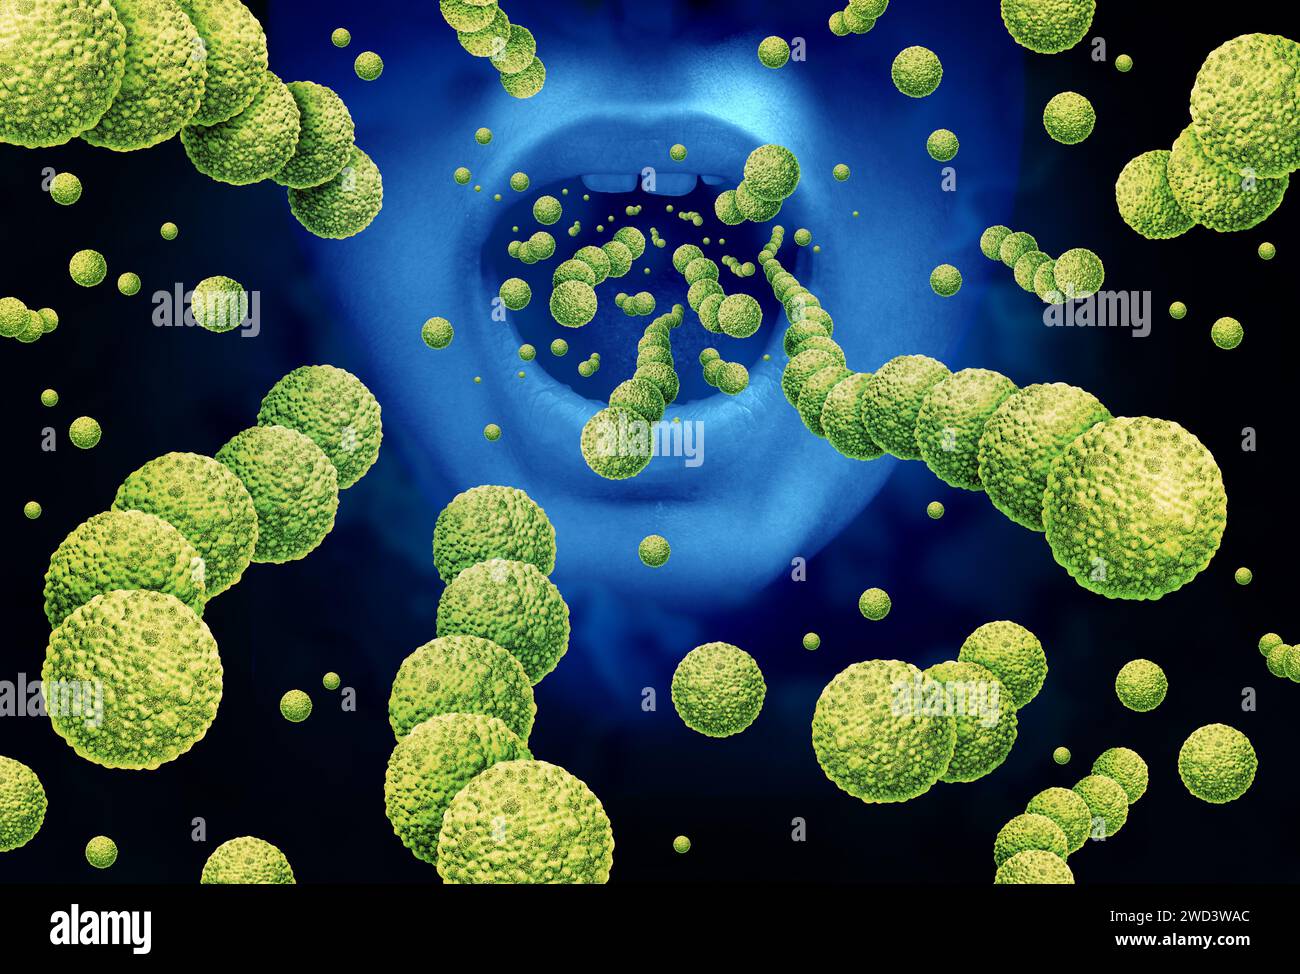 Streptococcus oral Bacteria and Streptococcal infections as gram-positive bacterial outbreak as spherical Streptococcaceae cell division spreading Stock Photo